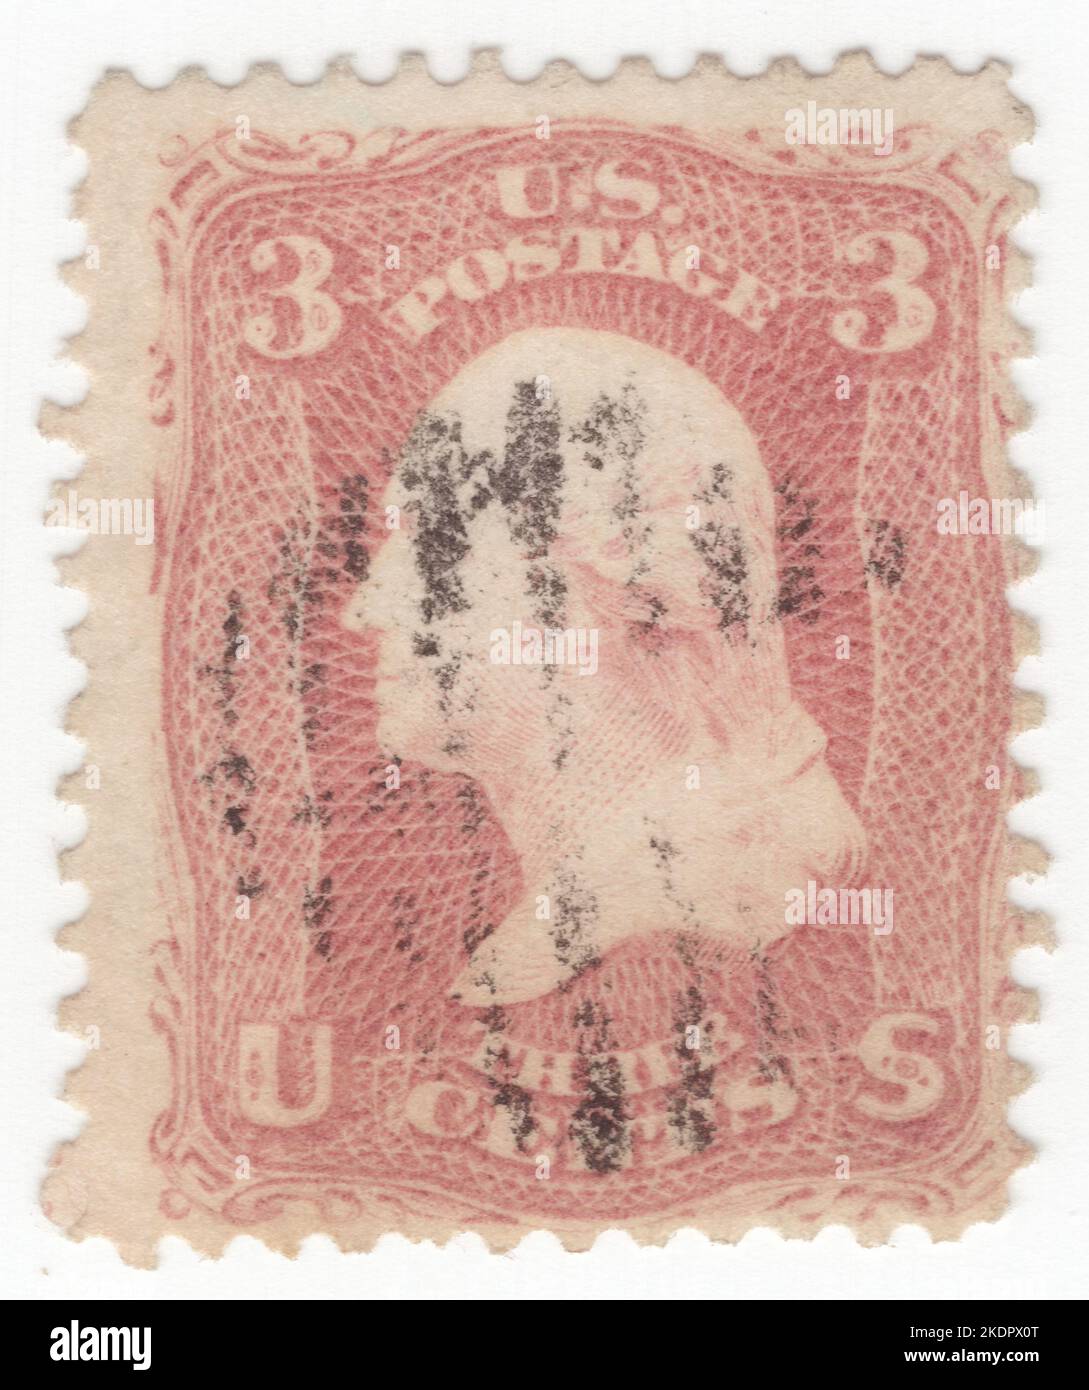 USA - 1861: An 3 cents rose postage stamp depicting portrait of George Washington. American military officer, statesman, and Founding Father who served as the first president of the United States from 1789 to 1797. Appointed by the Continental Congress as commander of the Continental Army, Washington led the Patriot forces to victory in the American Revolutionary War and served as the president of the Constitutional Convention of 1787, which created the Constitution of the United States and the American federal government. Washington has been called the 'Father of his Country' Stock Photo